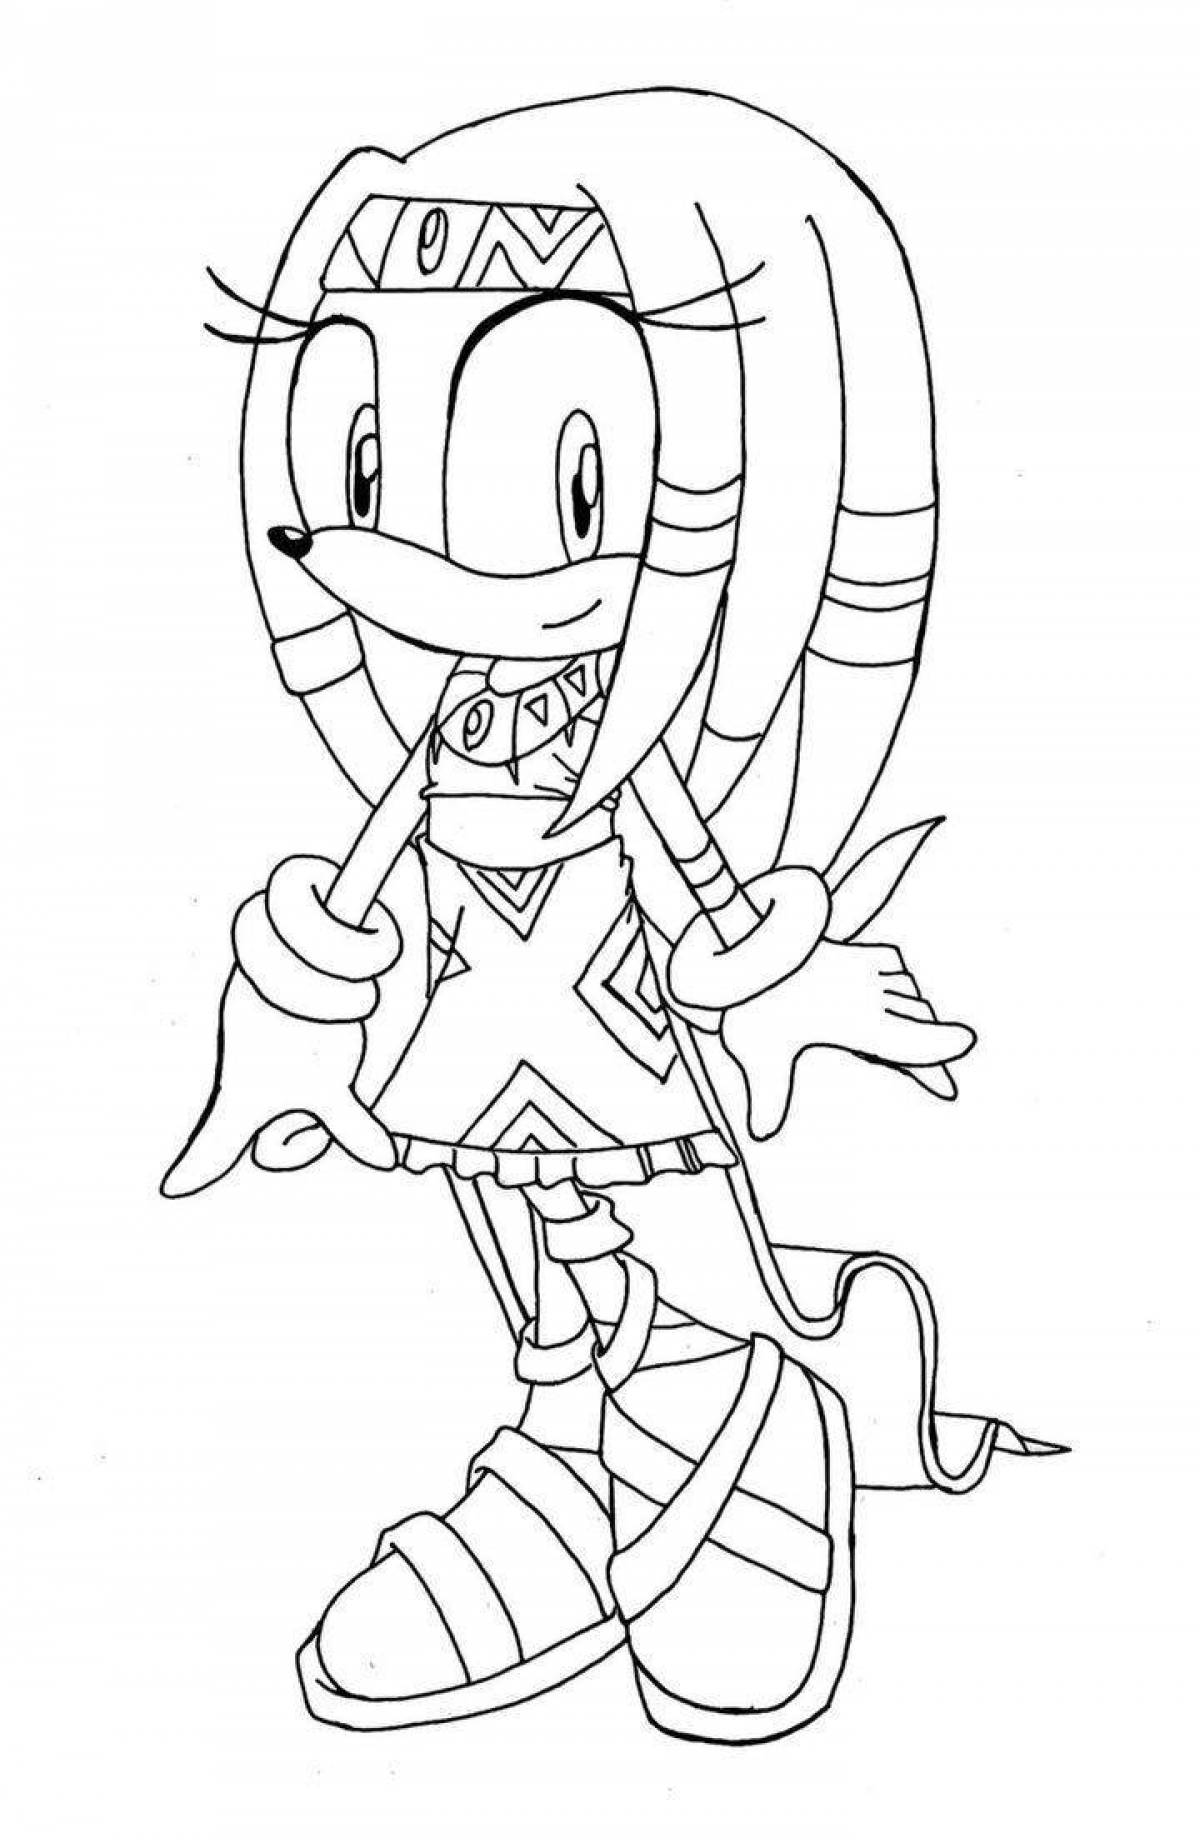 Tempting sonic knuckles coloring book